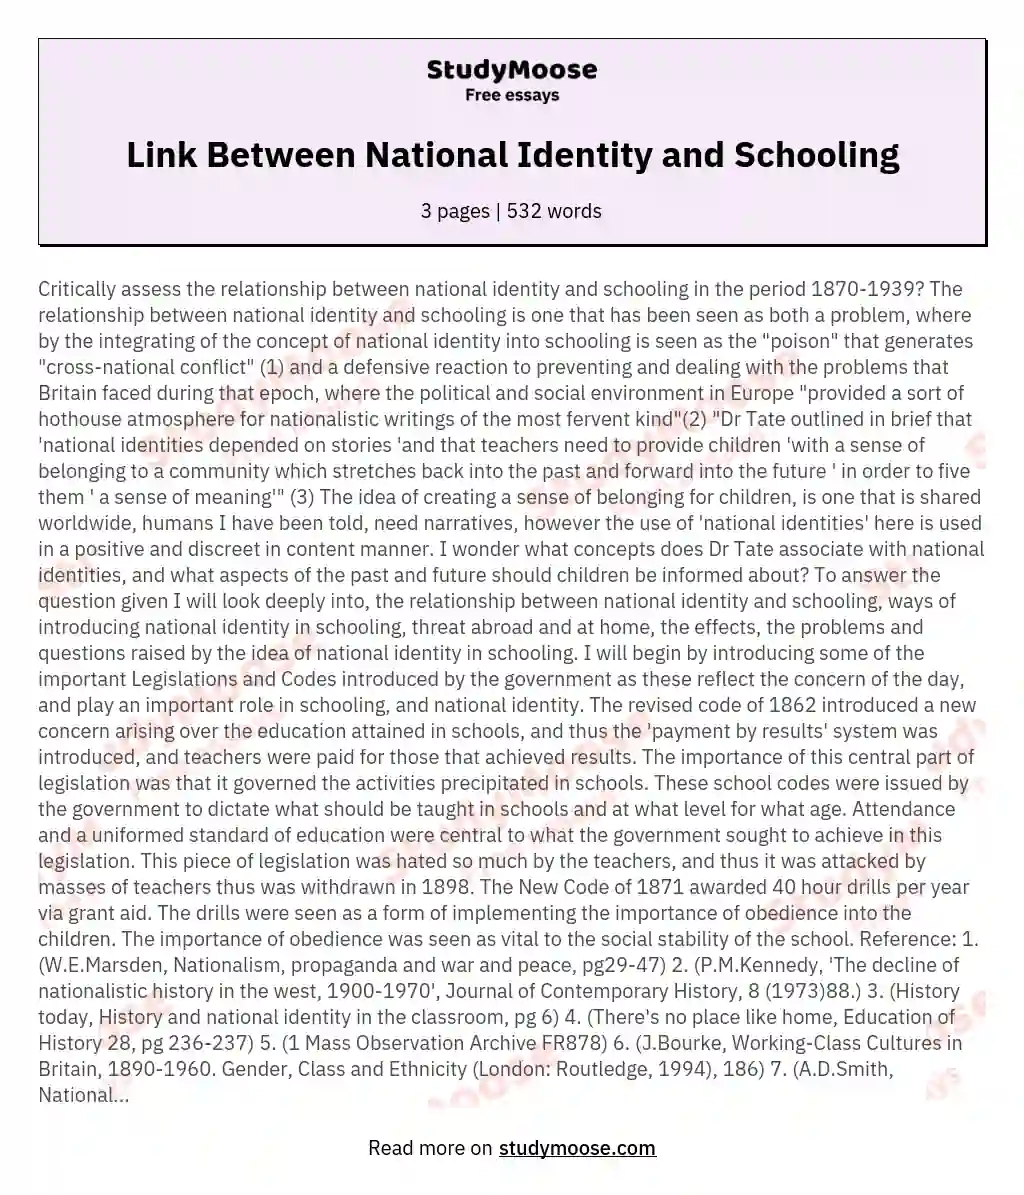 Link Between National Identity and Schooling essay